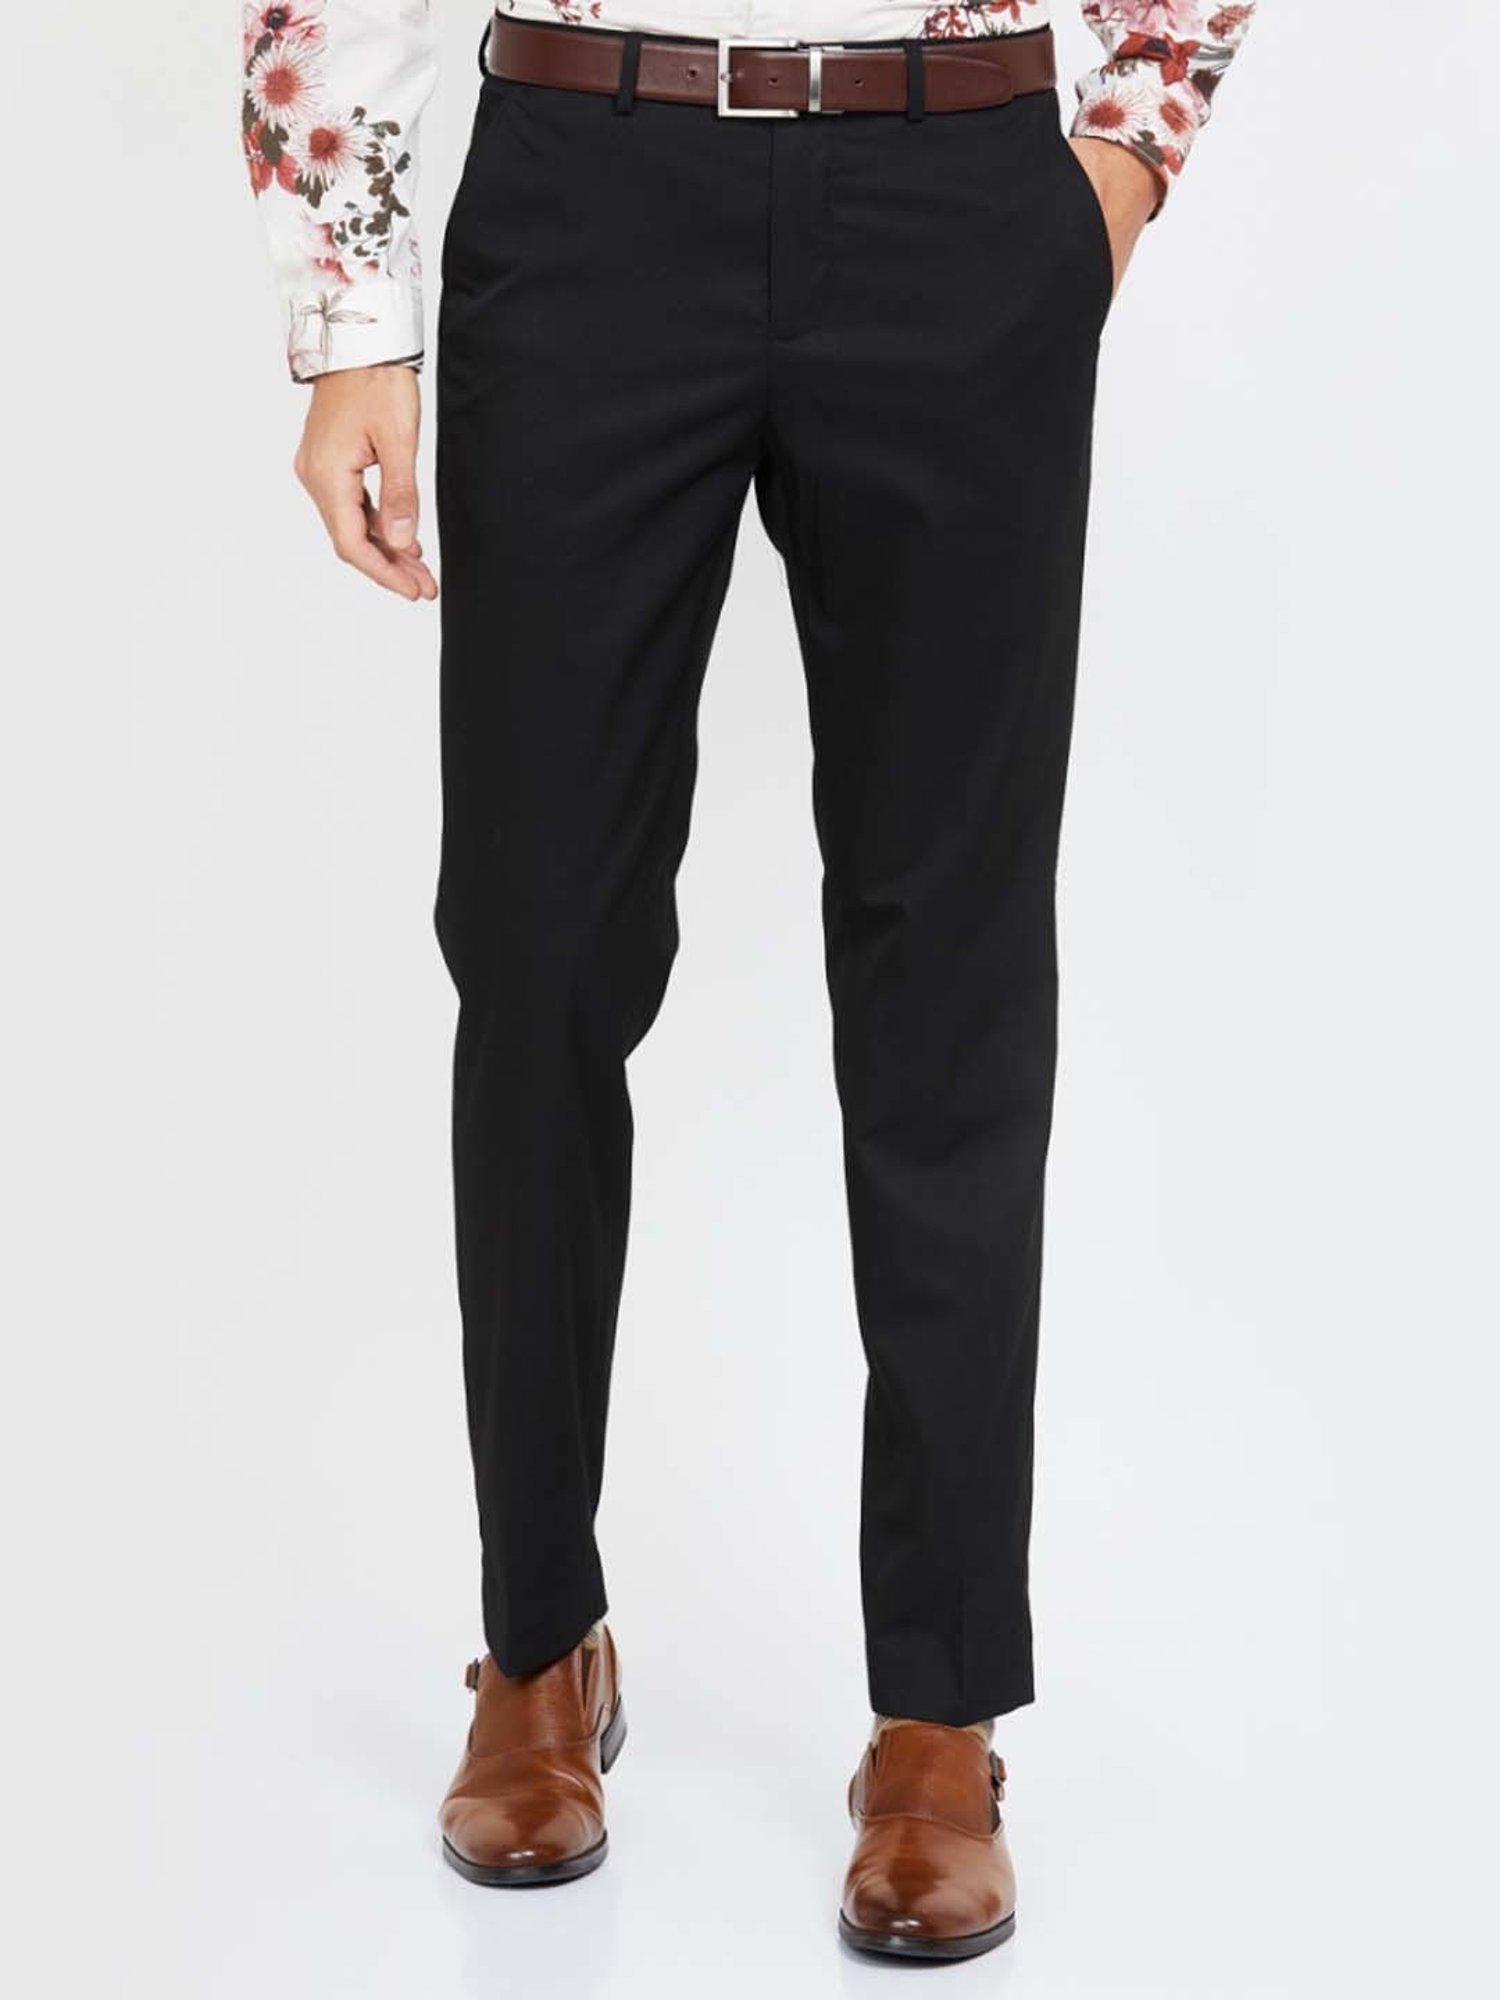 PullBear tapered pants in black and white stripe  ASOS